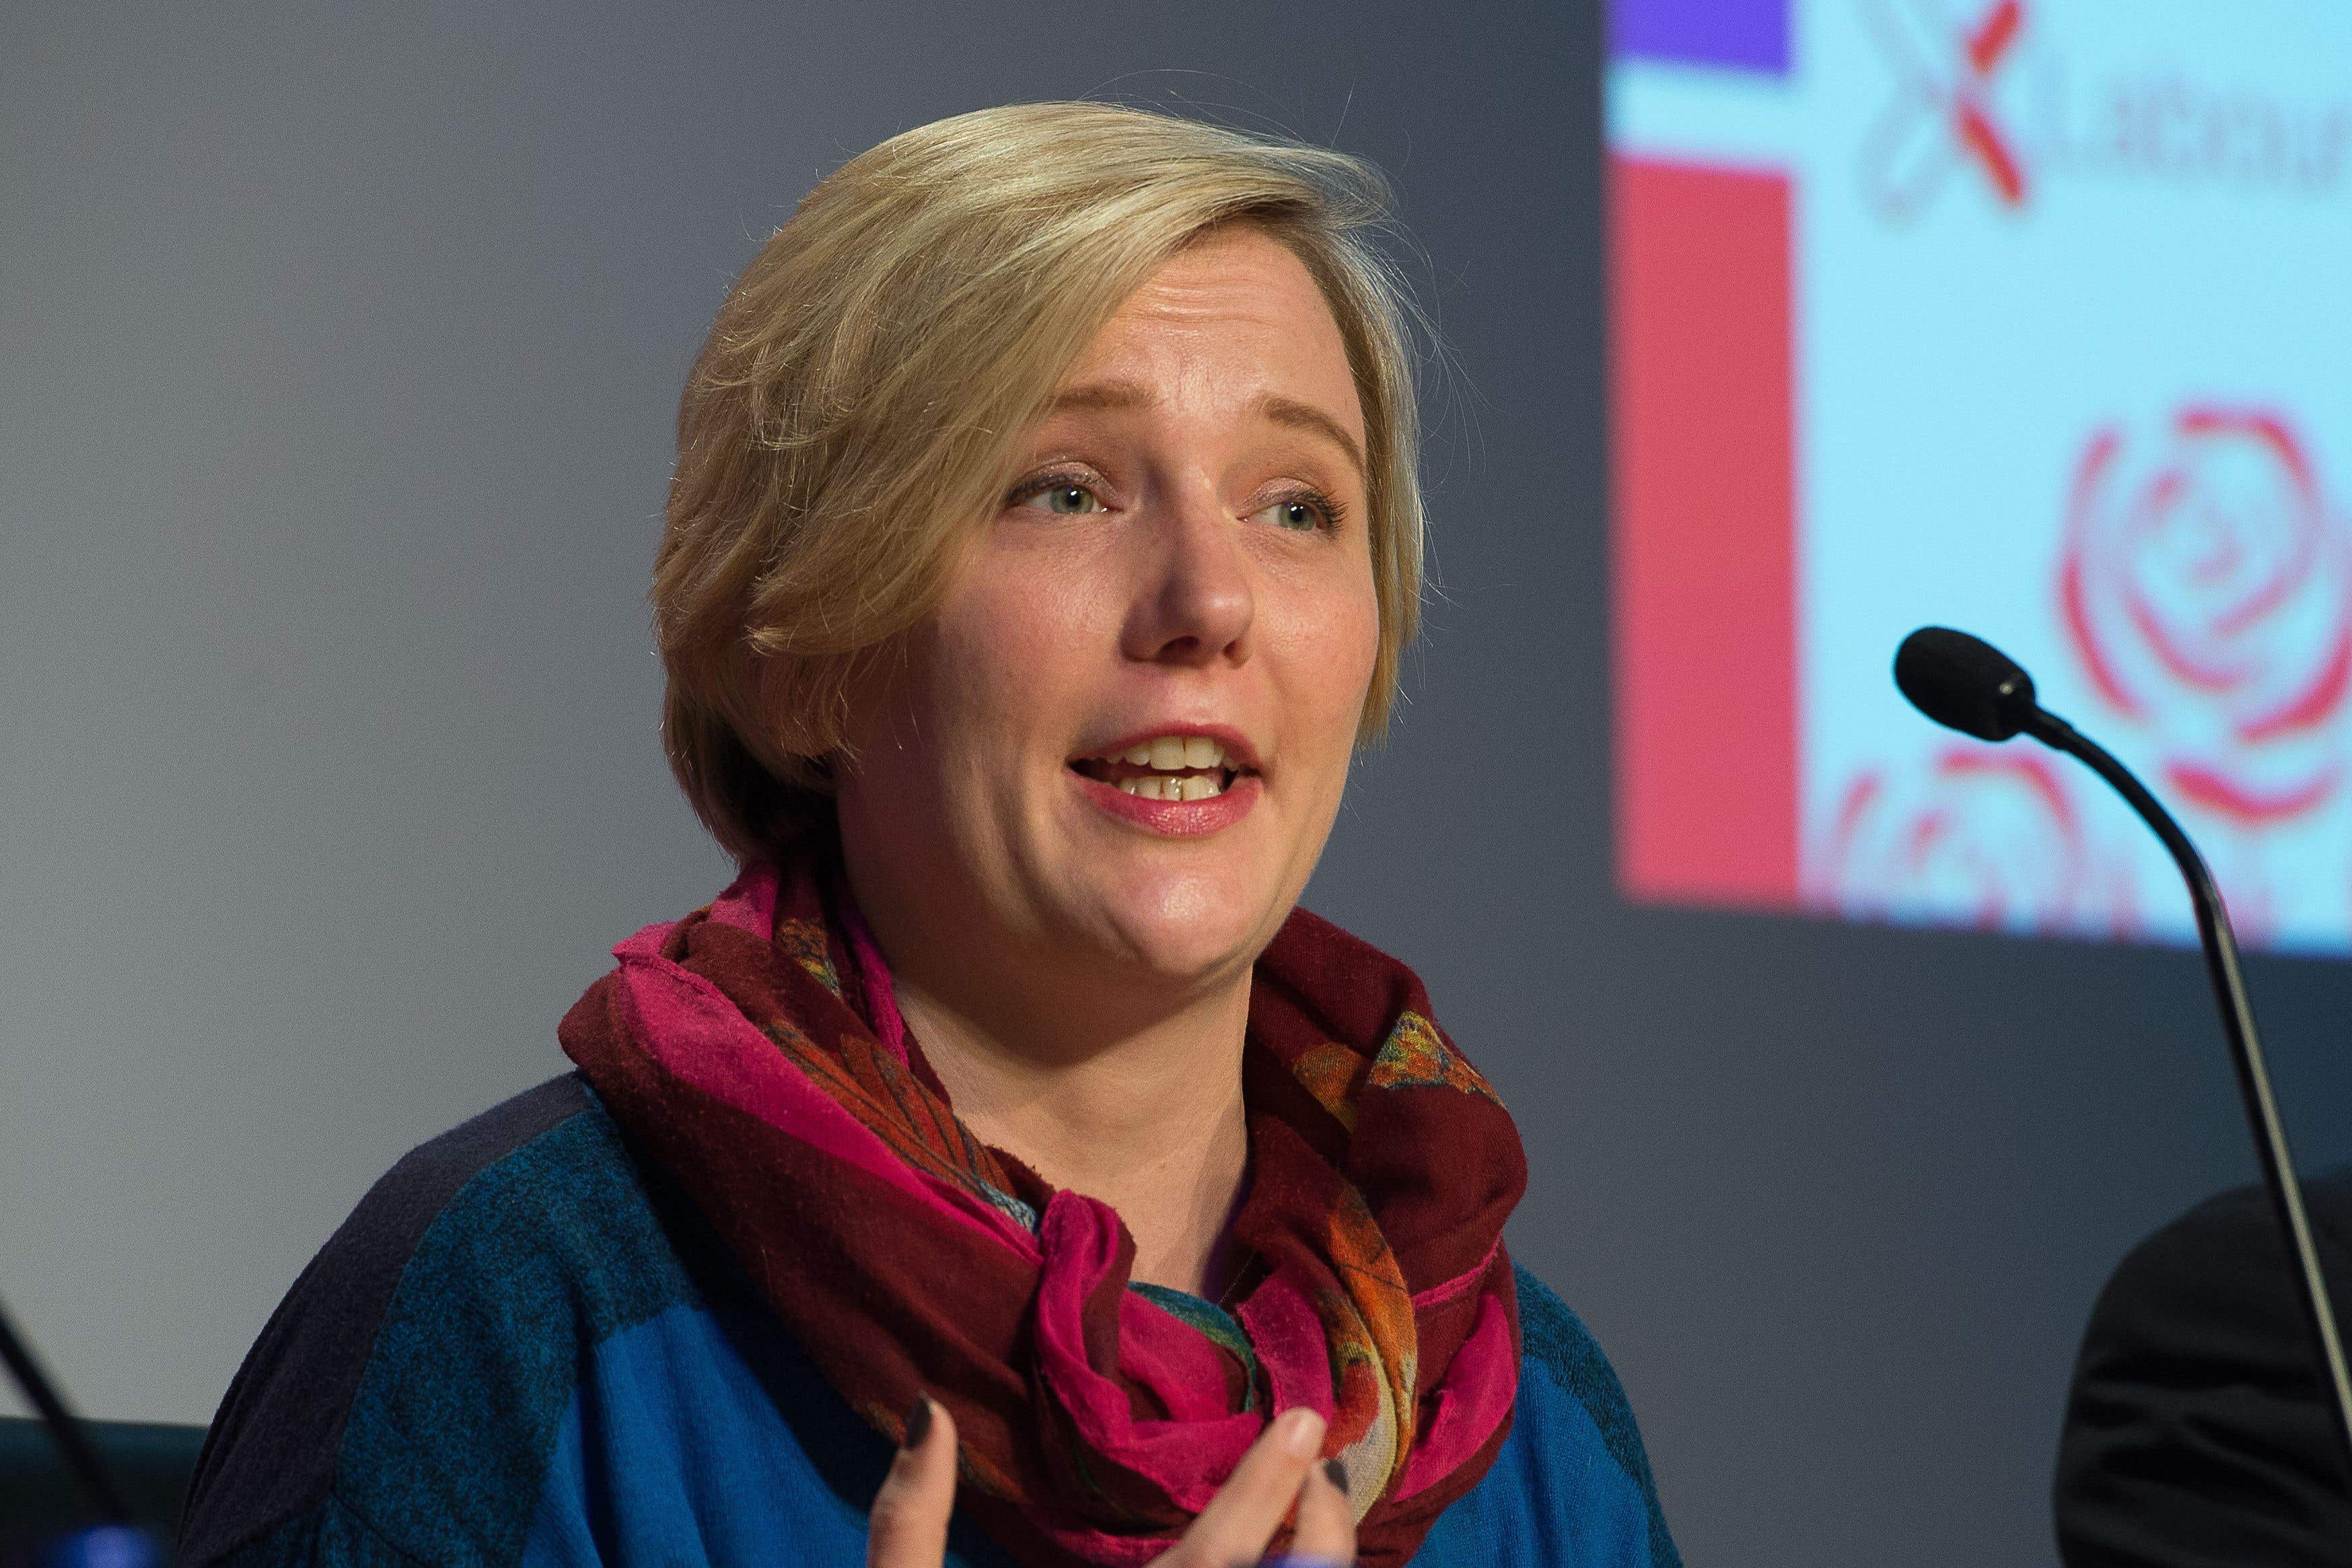 Stella Creasy says abortions must be treated as healthcare rather than a ‘criminal matter’ (Laura Lean/PA)